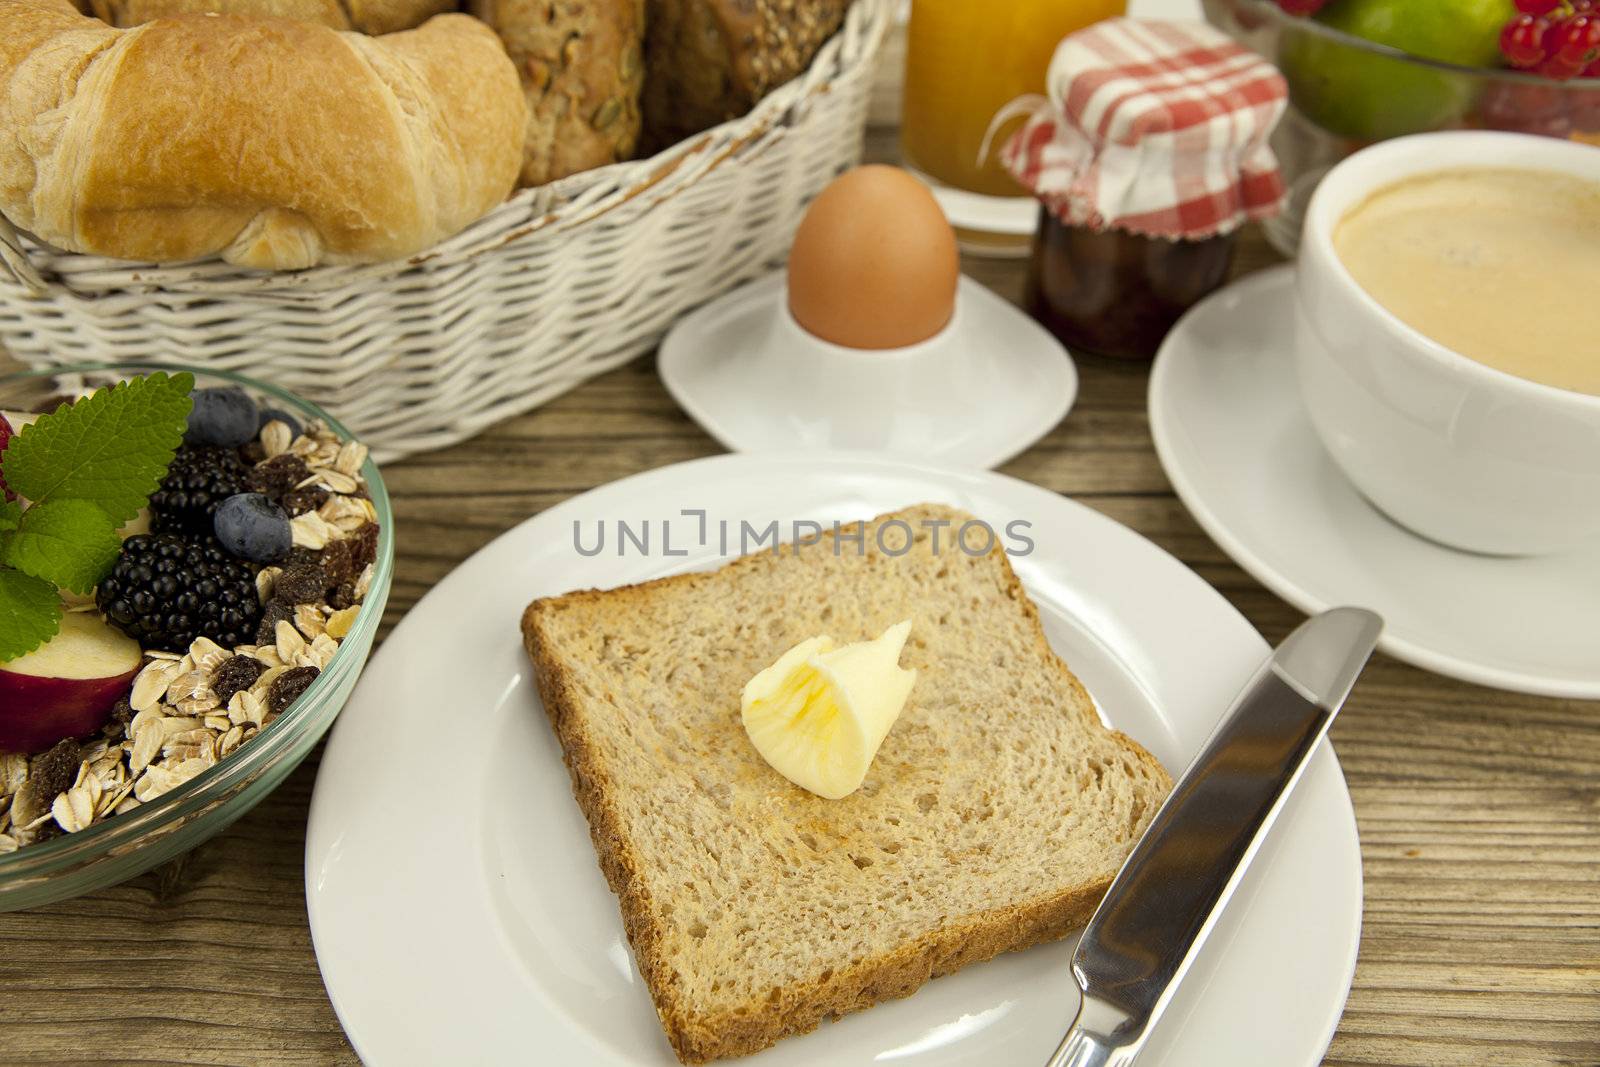 traditional french breakfast in morning on wooden background